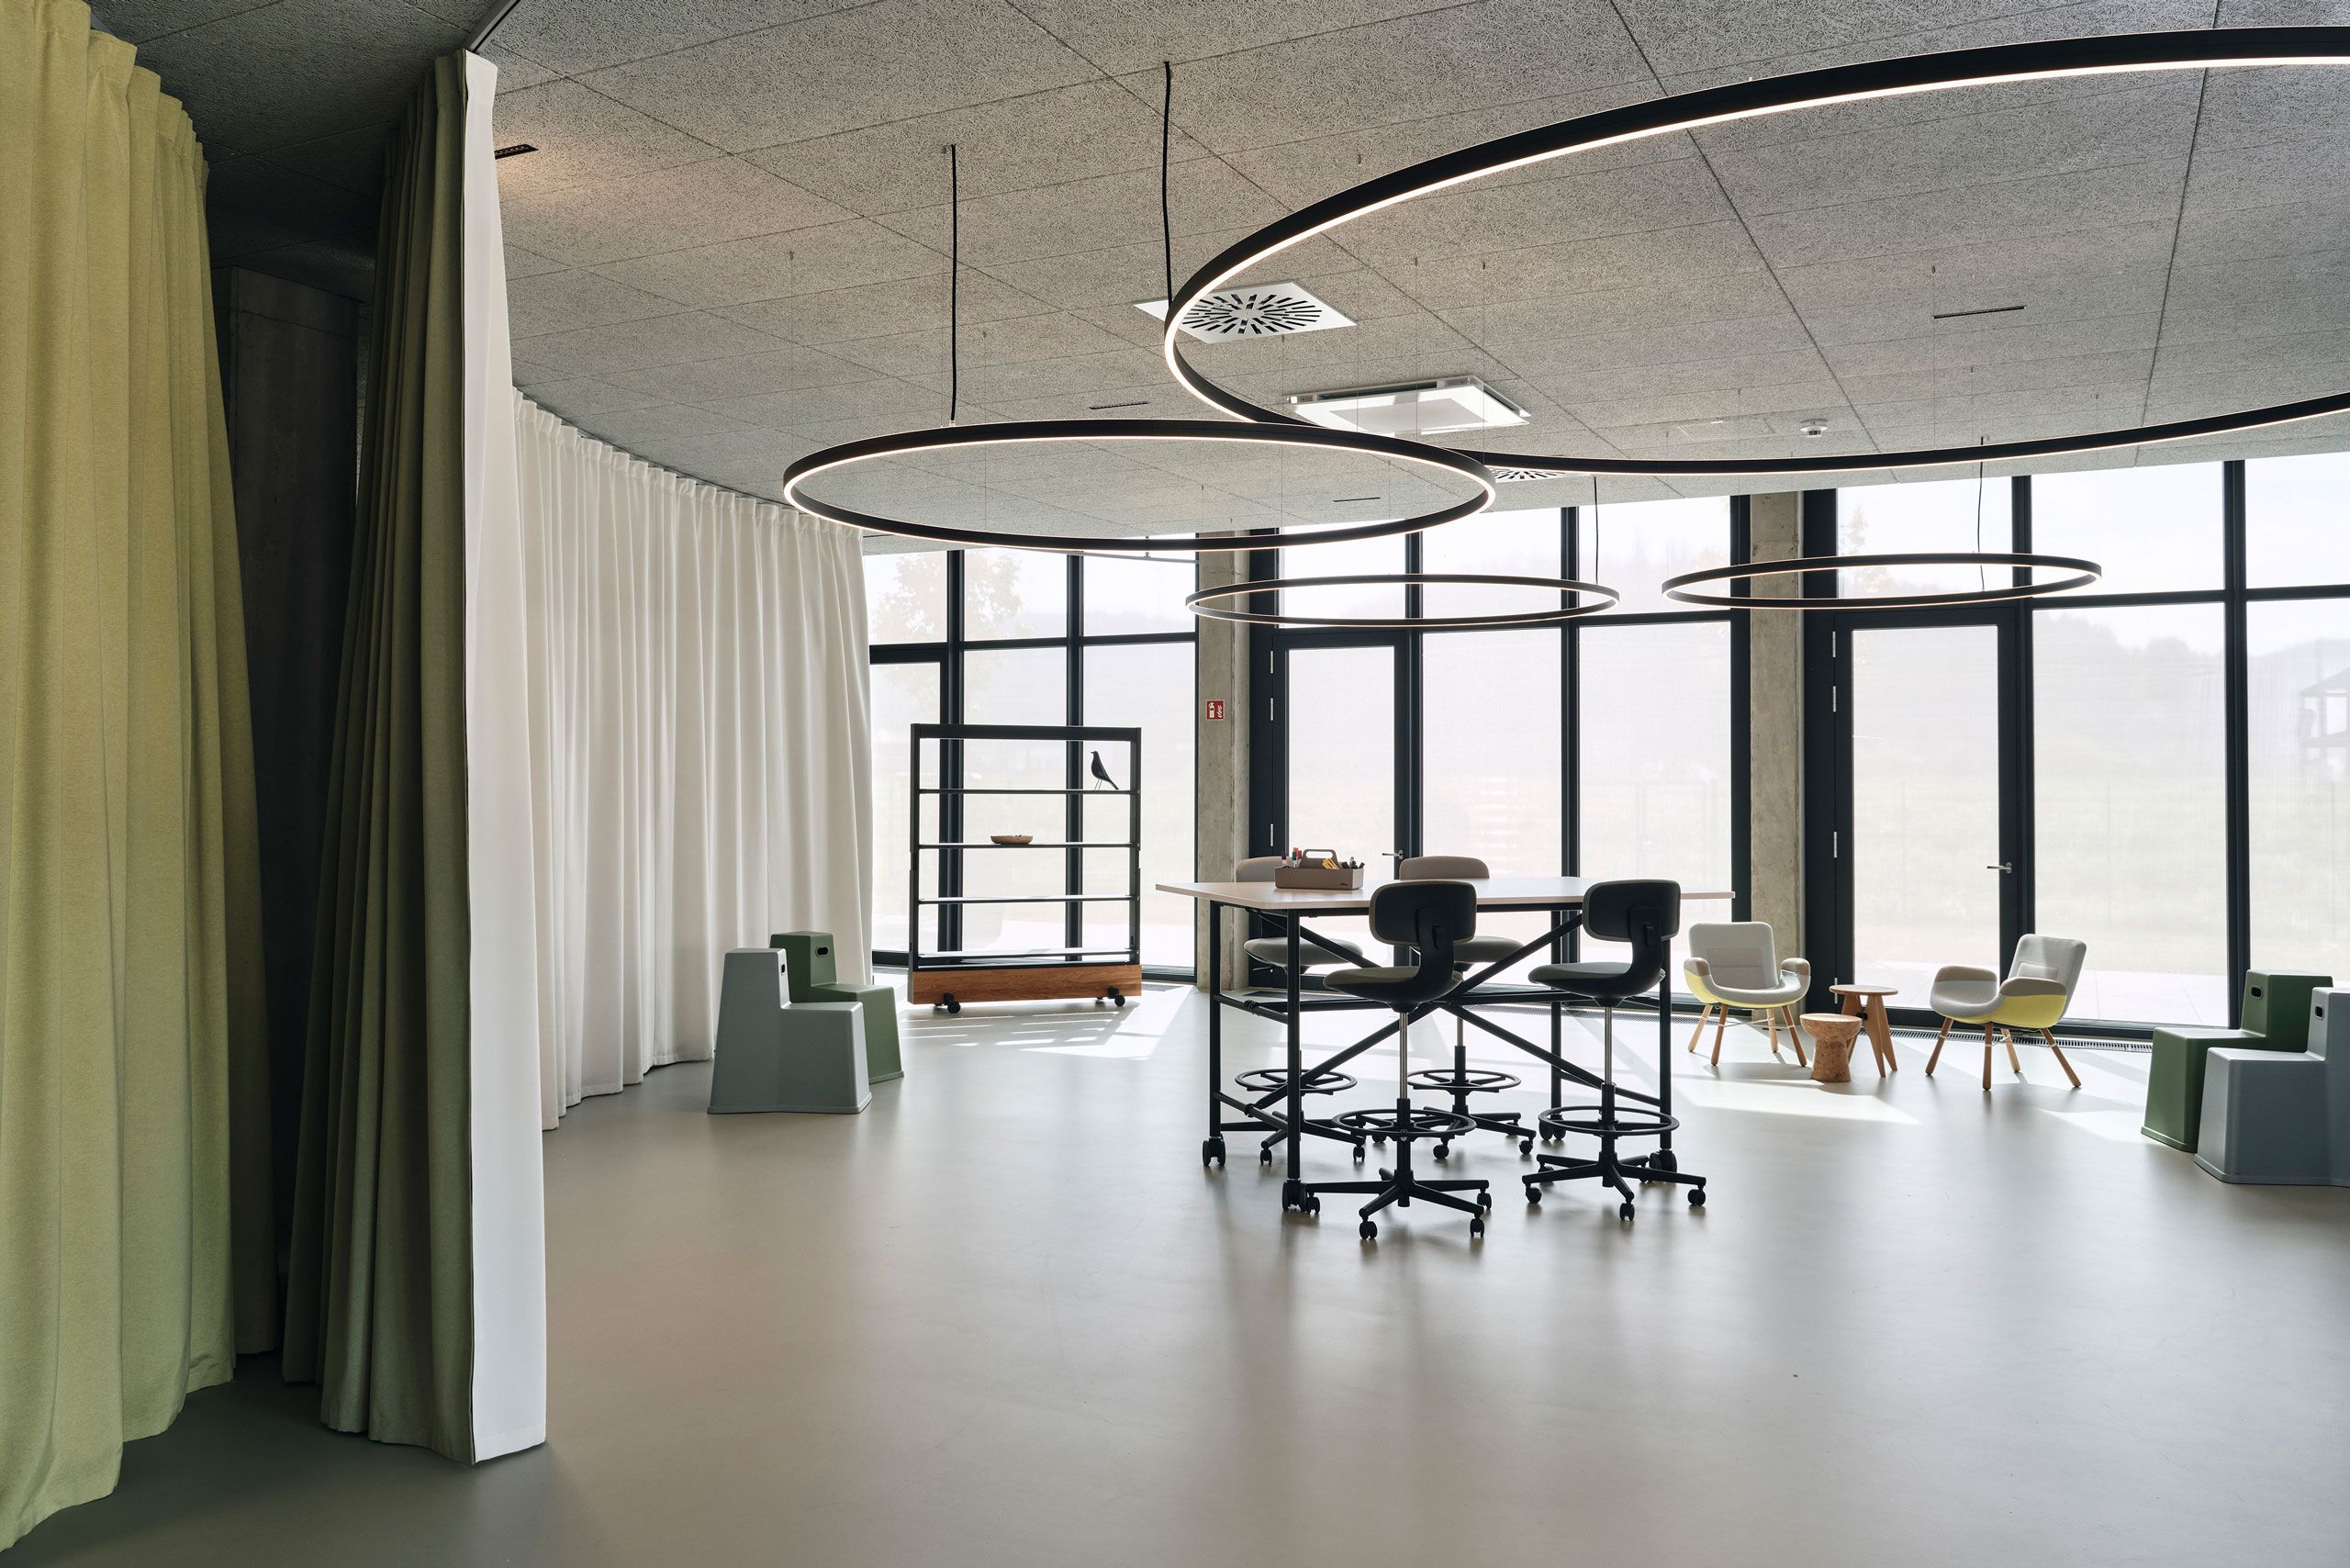 Spacious office situation which can be separated with an acoustically effective curtain, for example for meetings.